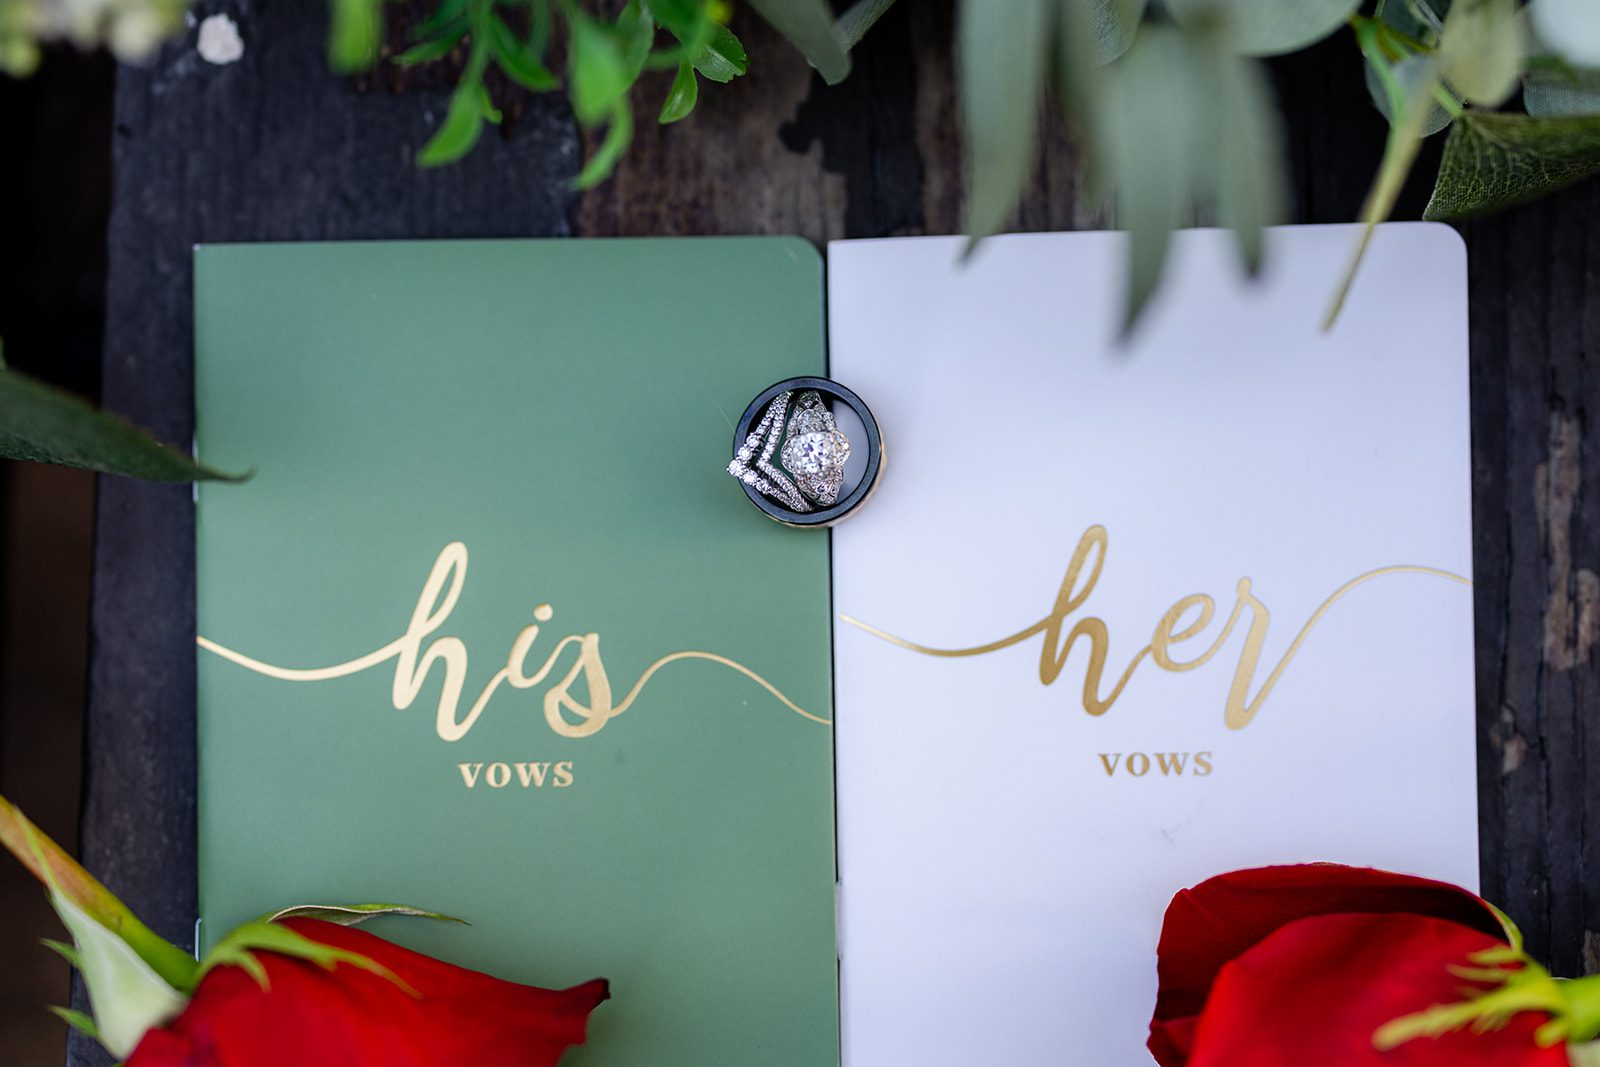 His and hers vow books with wedding rings and red roses from rose ceremony for eloepment. 